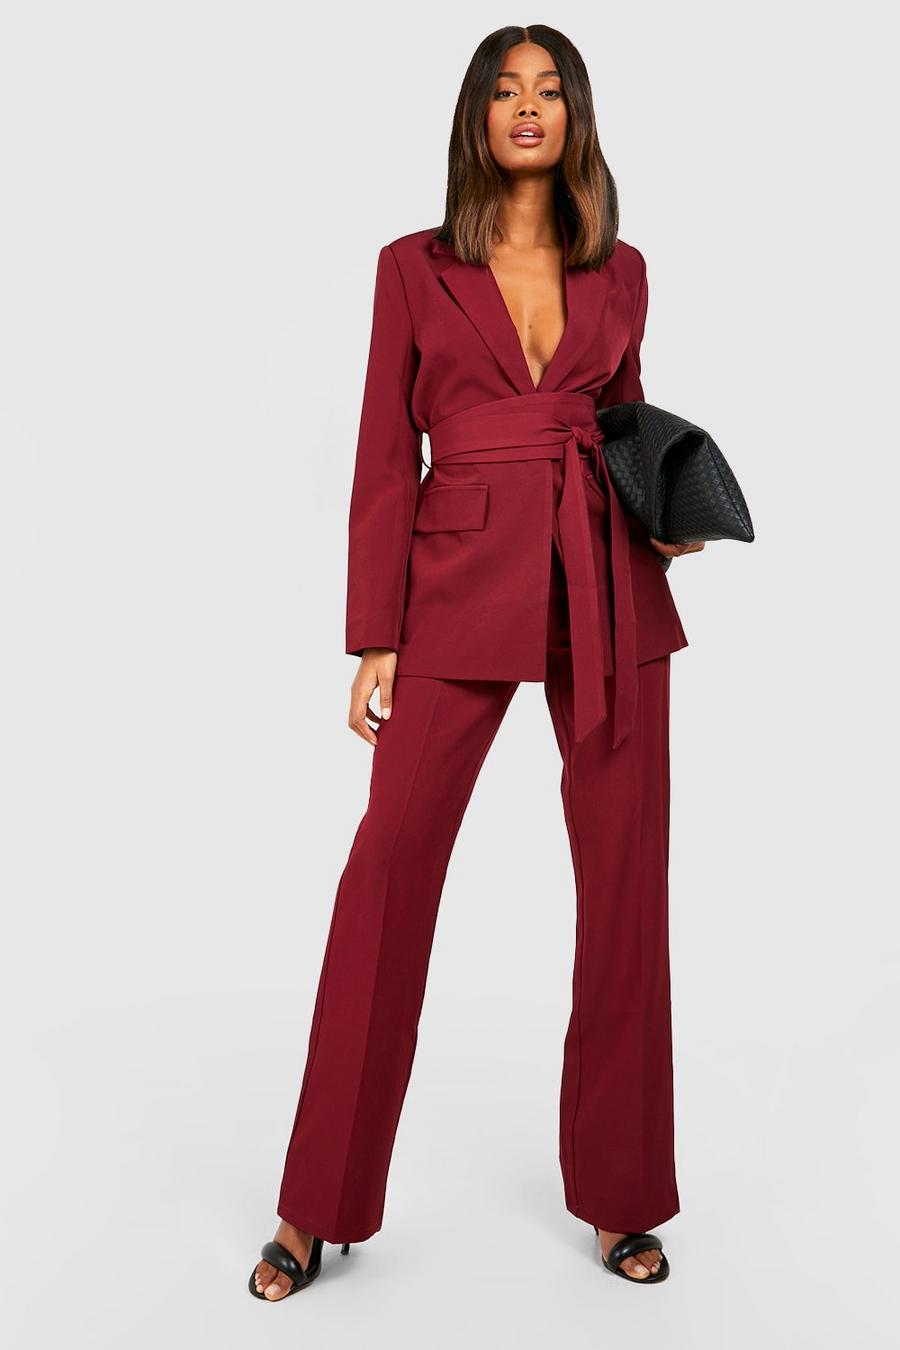 Merlot Fit & Flare Tailored Pants